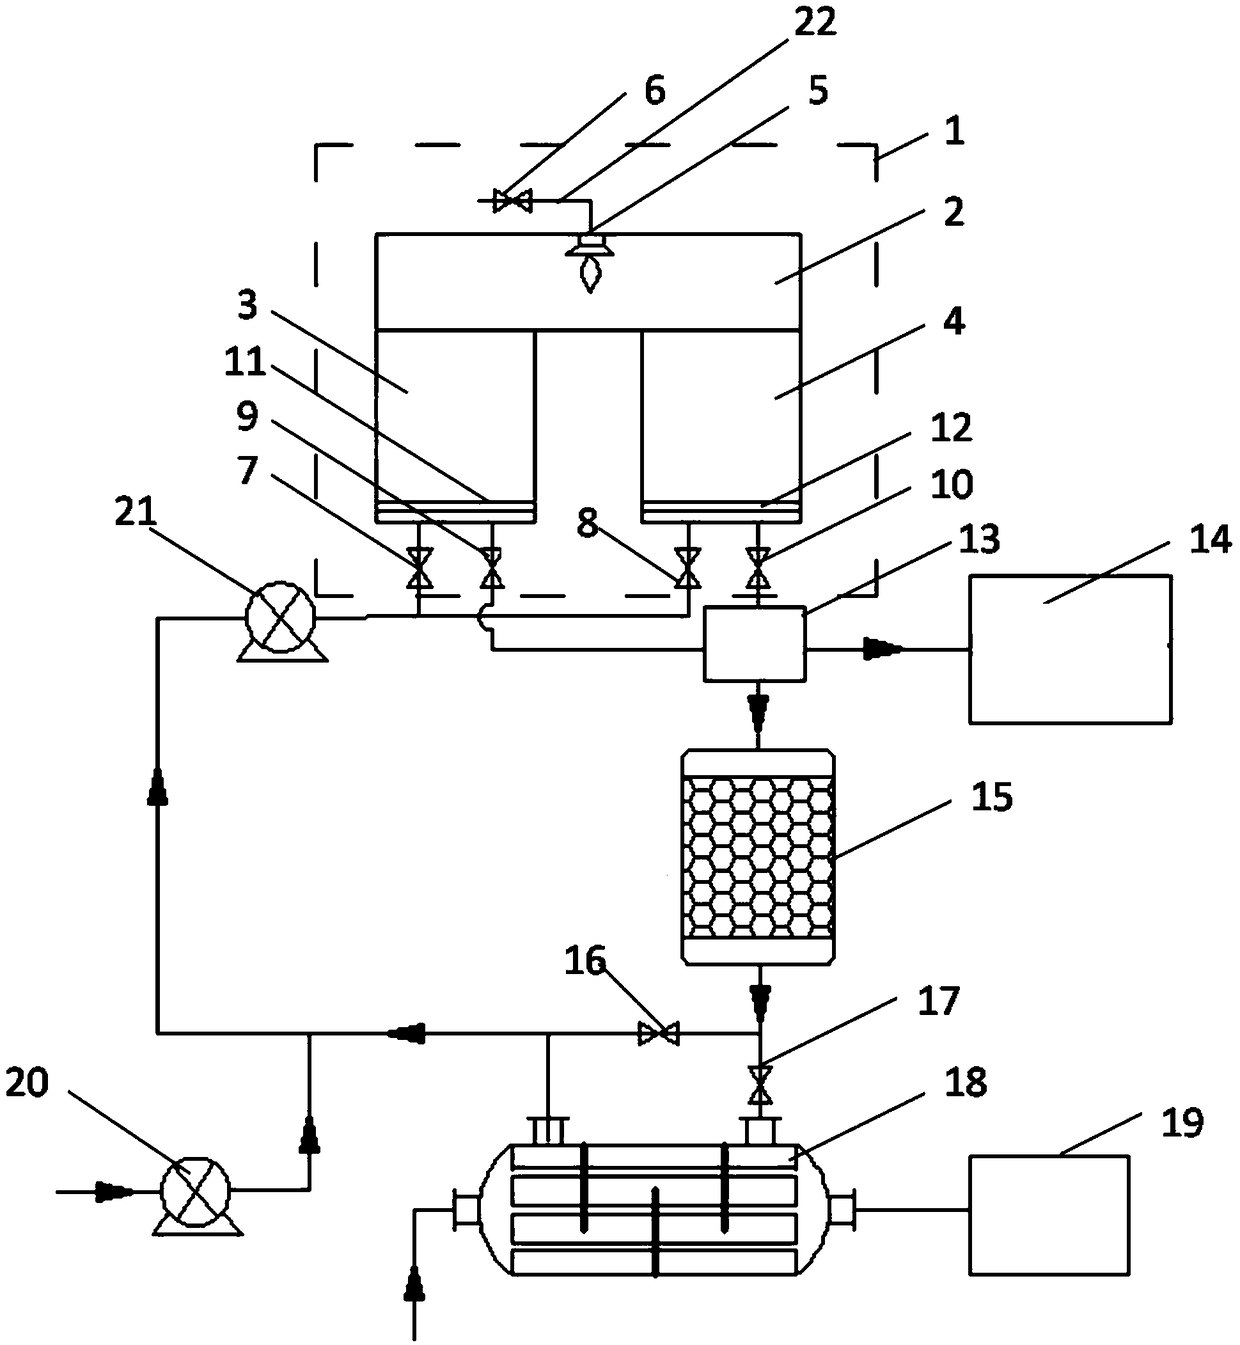 VOCs thermal oxidation treatment-based comprehensive waste heat recycling system and recycling method